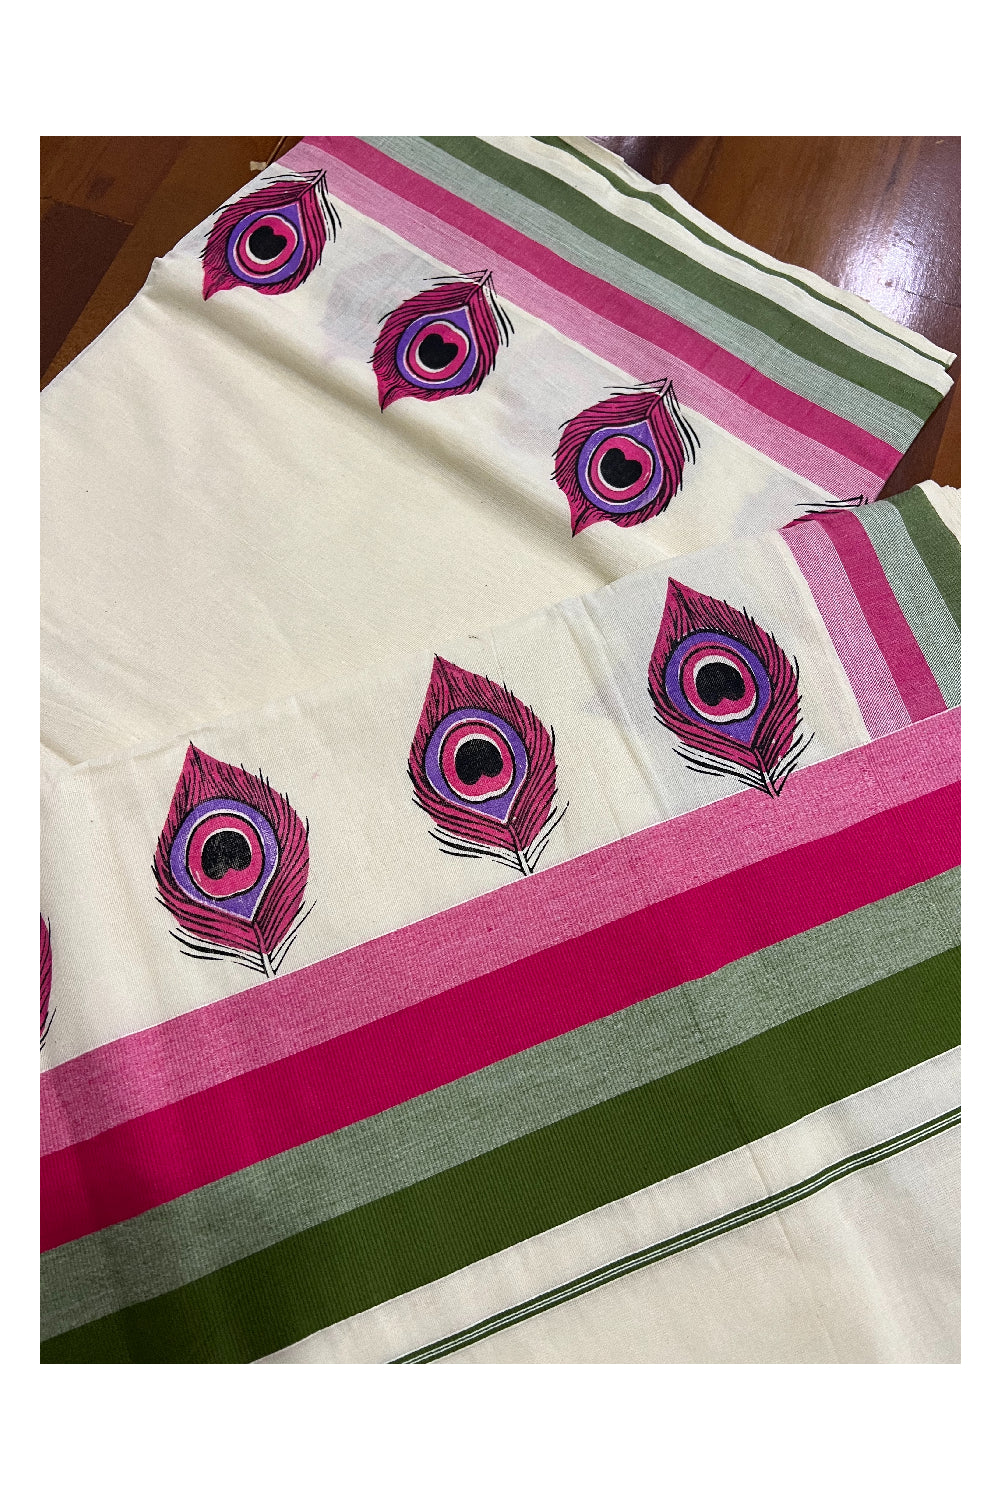 Kerala Cotton Saree with Pink Peacock Feather Mural Printed and Multi Colour Border